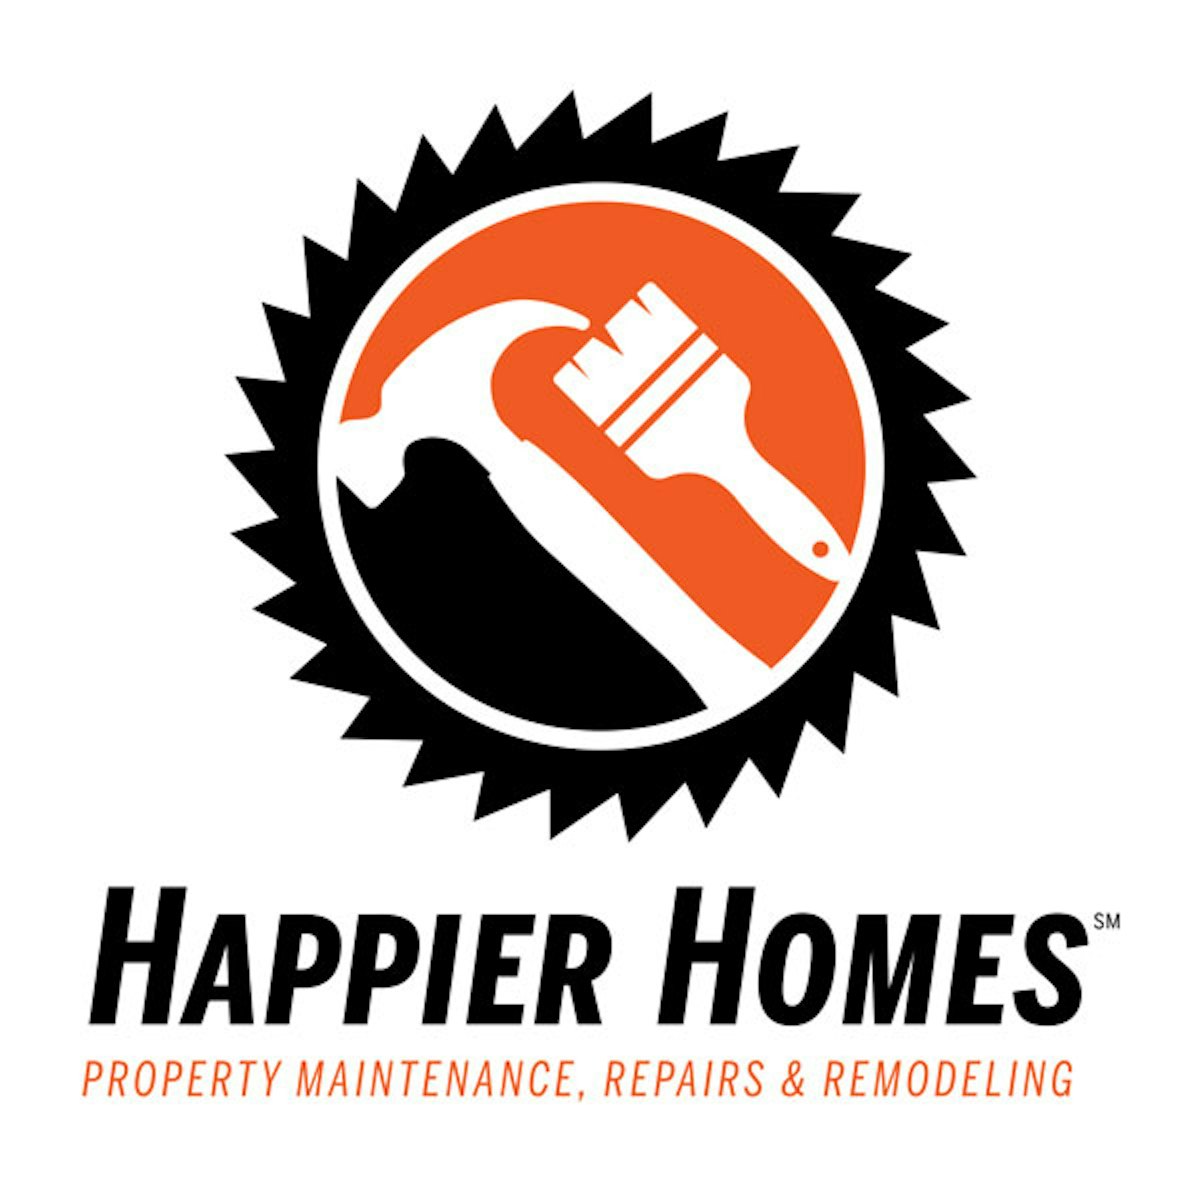 Happier Homes - Hover Image